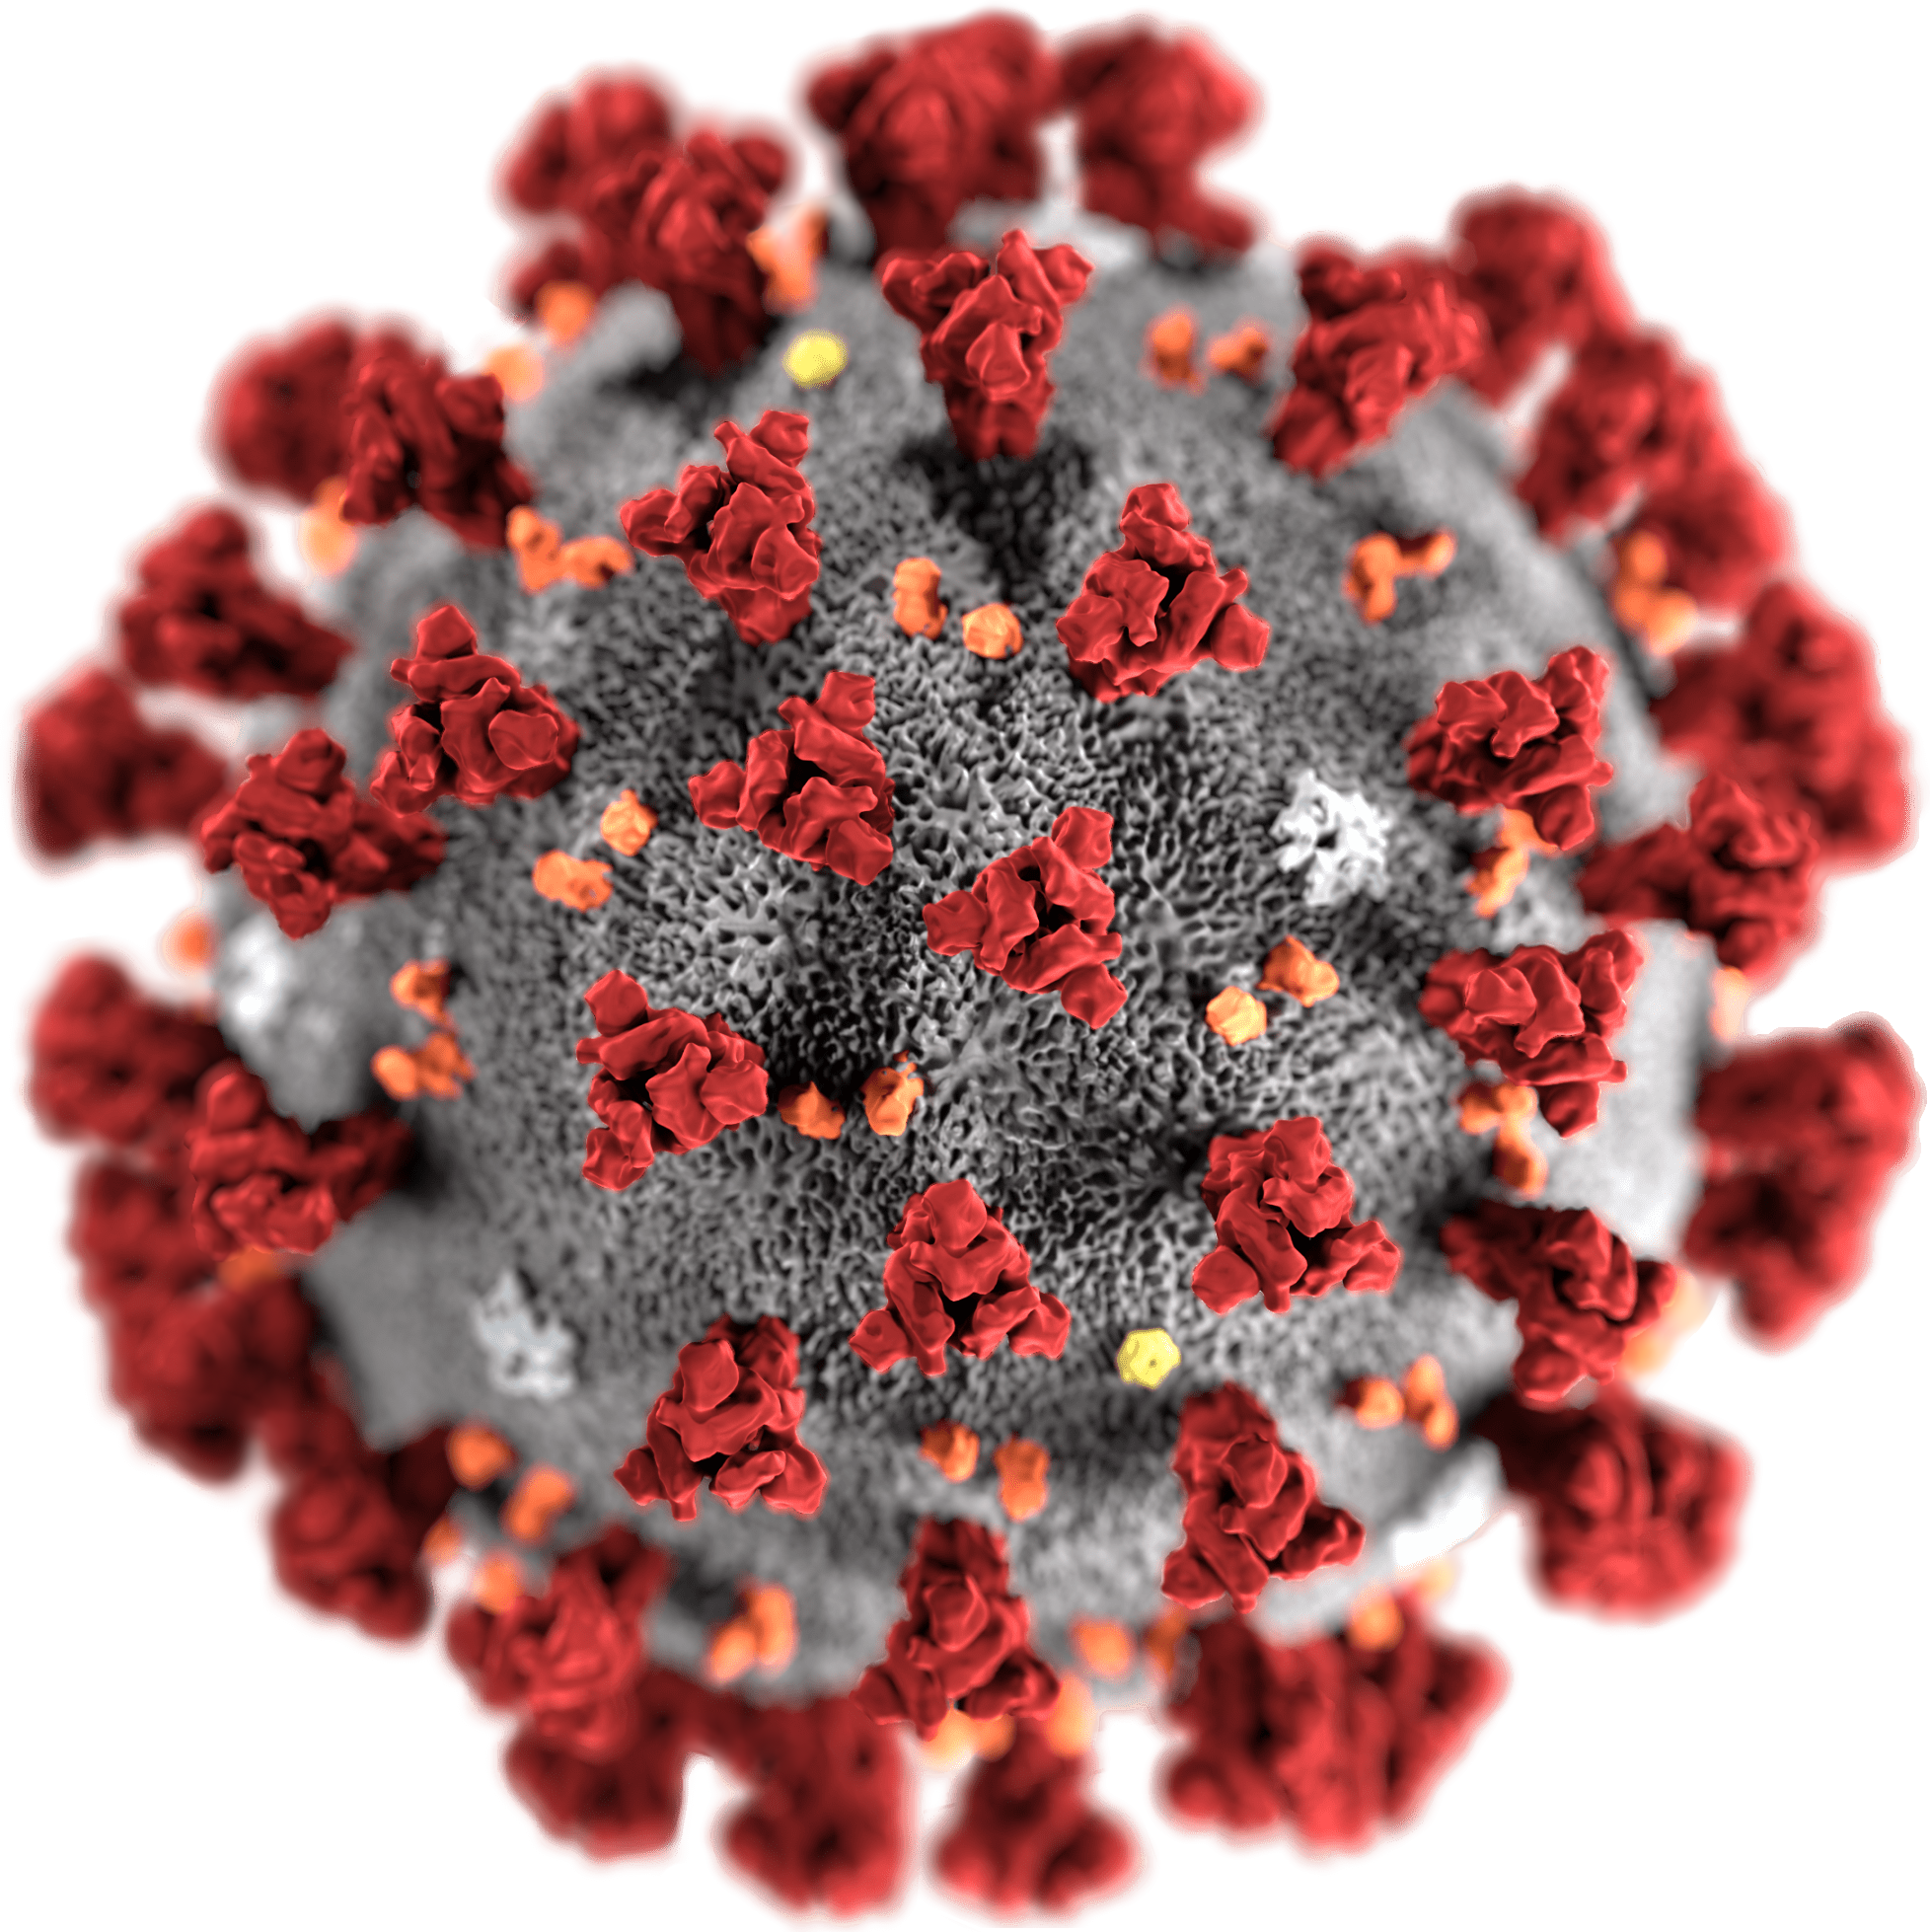 Coronavirus 2019 Ncov Cchd The free images are pixel perfect to fit your design and available in both png and vector. coronavirus 2019 ncov cchd